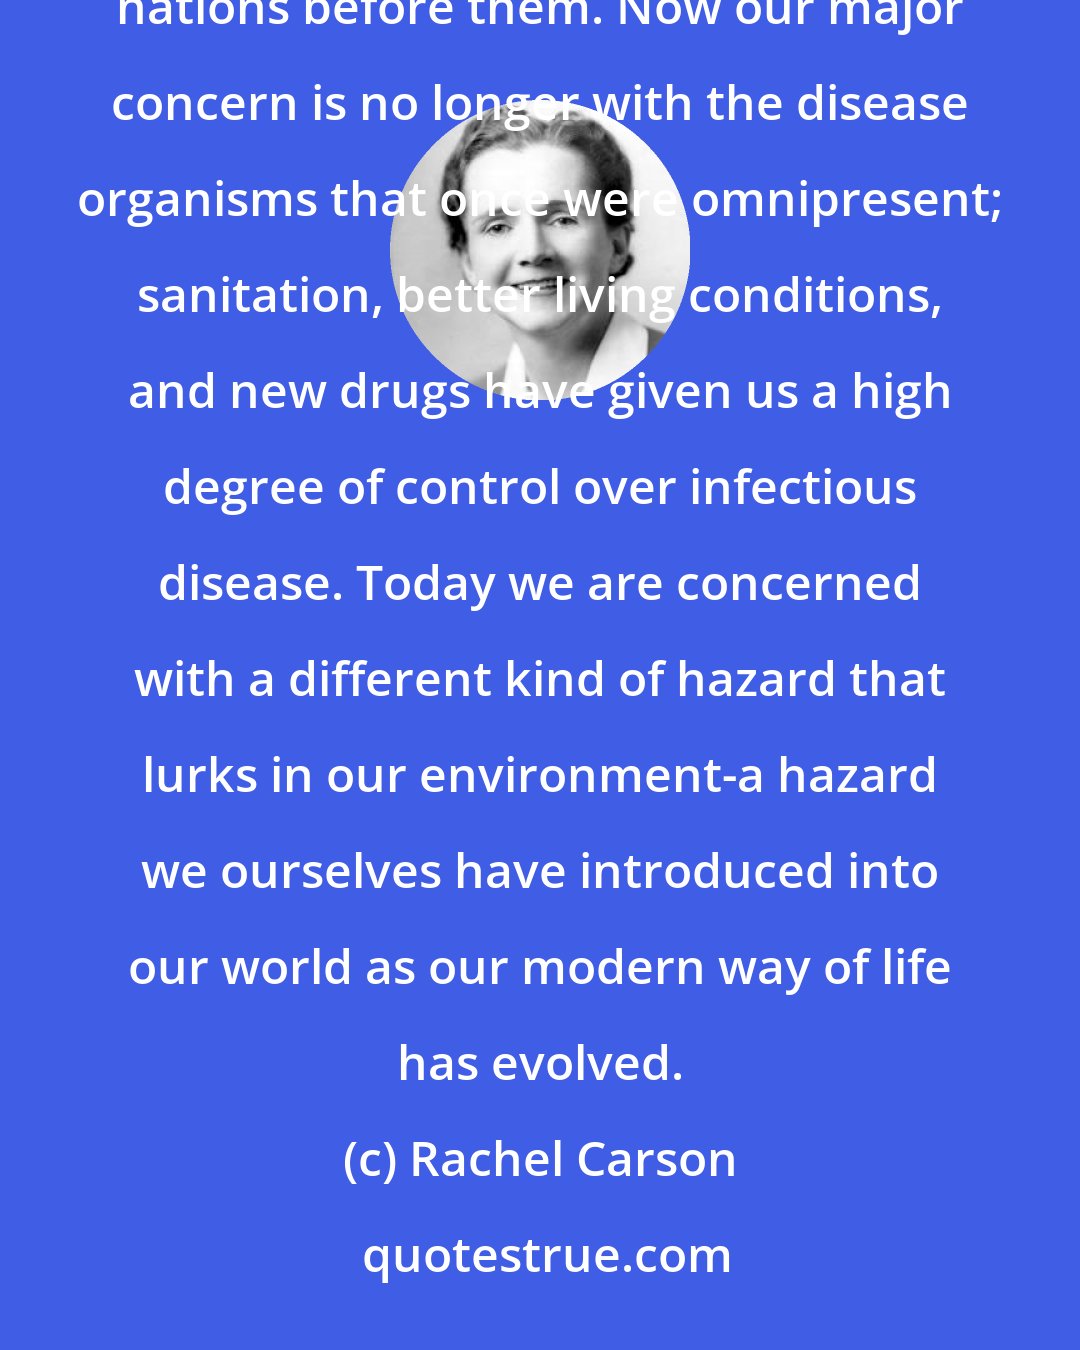 Rachel Carson: Only yesterday mankind lived in fear of the scourges of smallpox, cholera and plague that once swept nations before them. Now our major concern is no longer with the disease organisms that once were omnipresent; sanitation, better living conditions, and new drugs have given us a high degree of control over infectious disease. Today we are concerned with a different kind of hazard that lurks in our environment-a hazard we ourselves have introduced into our world as our modern way of life has evolved.